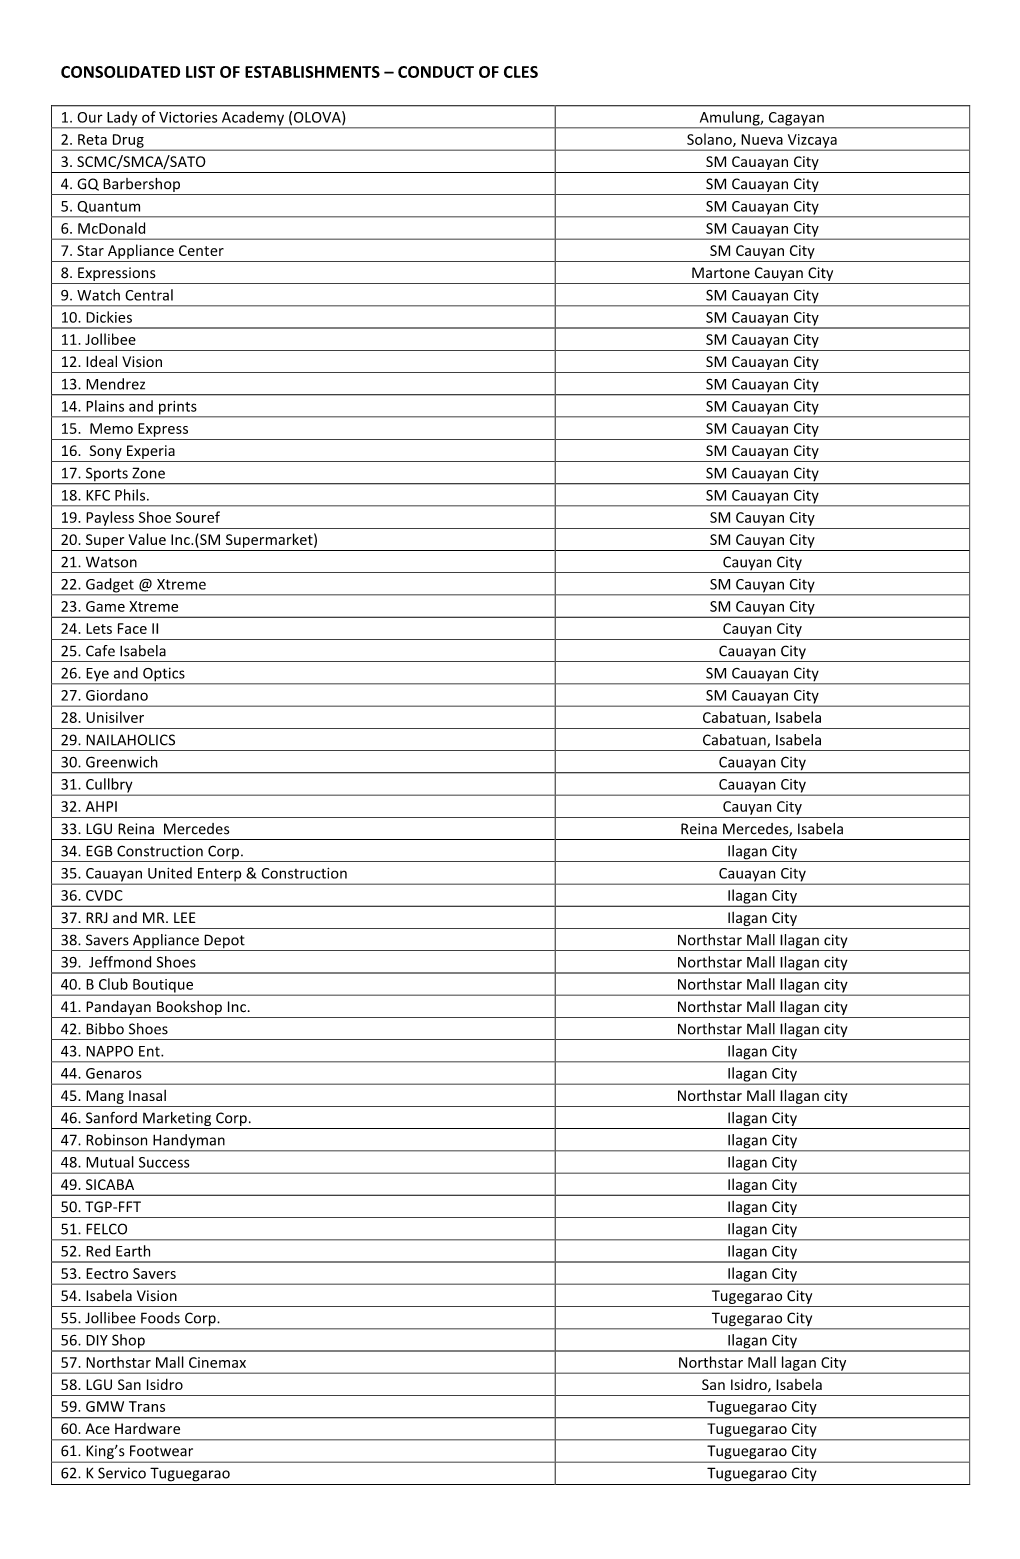 Consolidated List of Establishments – Conduct of Cles